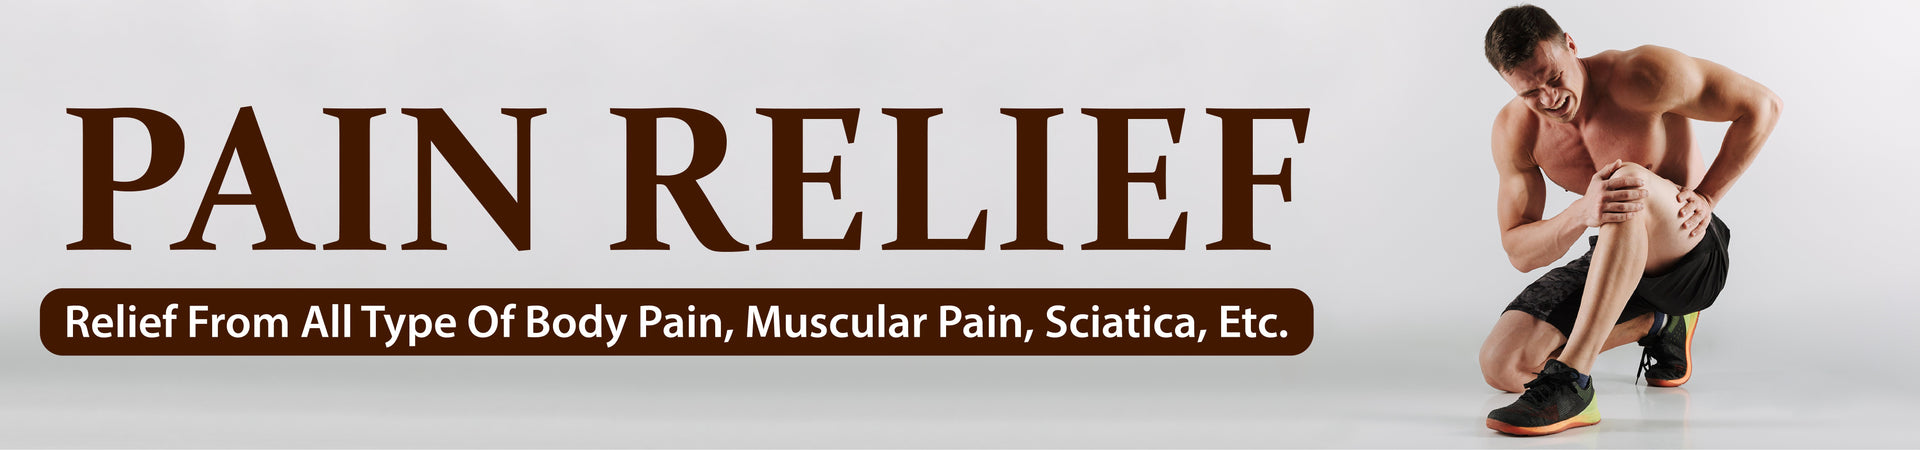 Ayurvedic Medicine & Pain Killer Tablets for Pain Relief